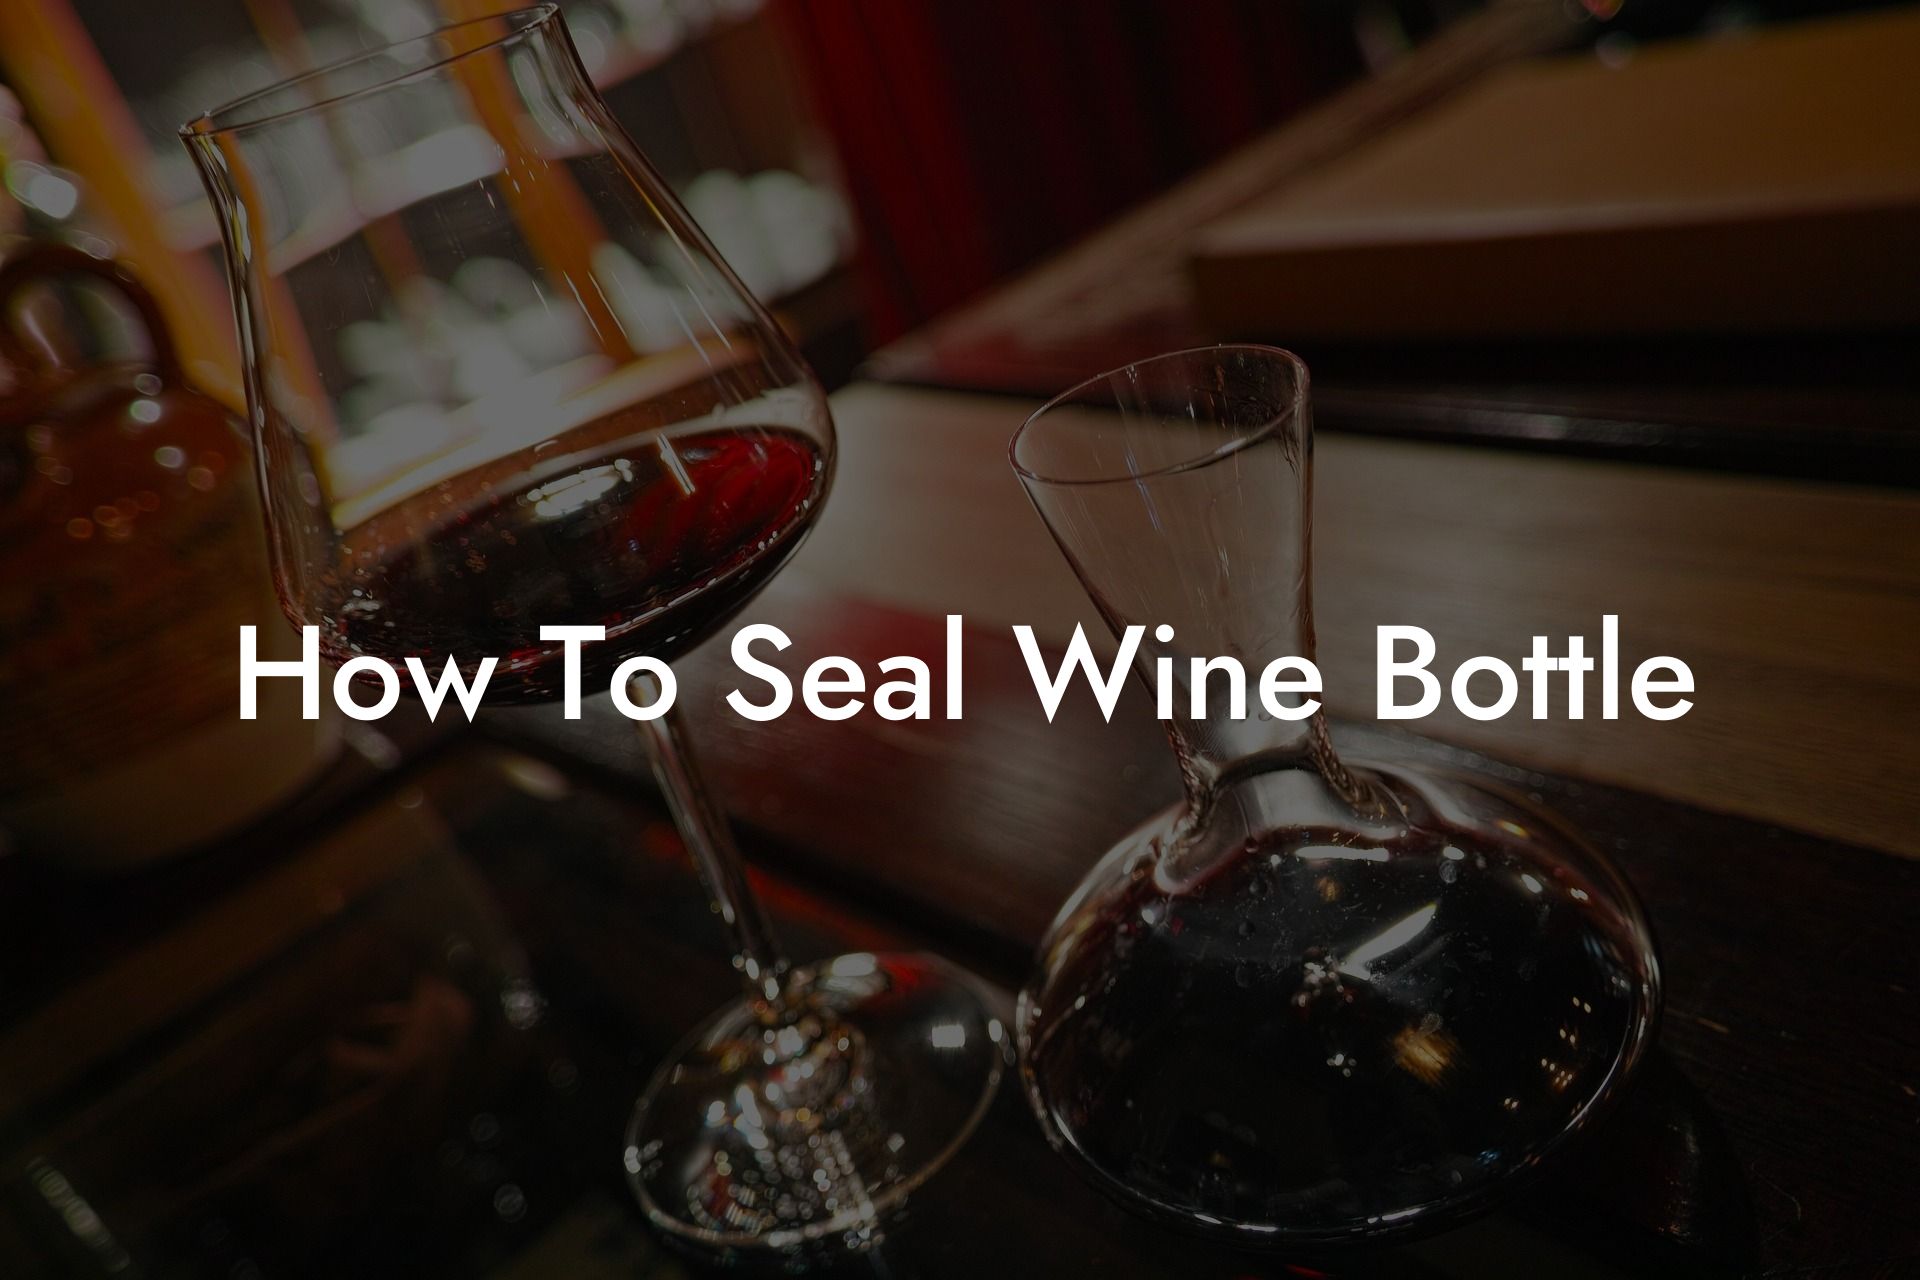 How To Seal Wine Bottle